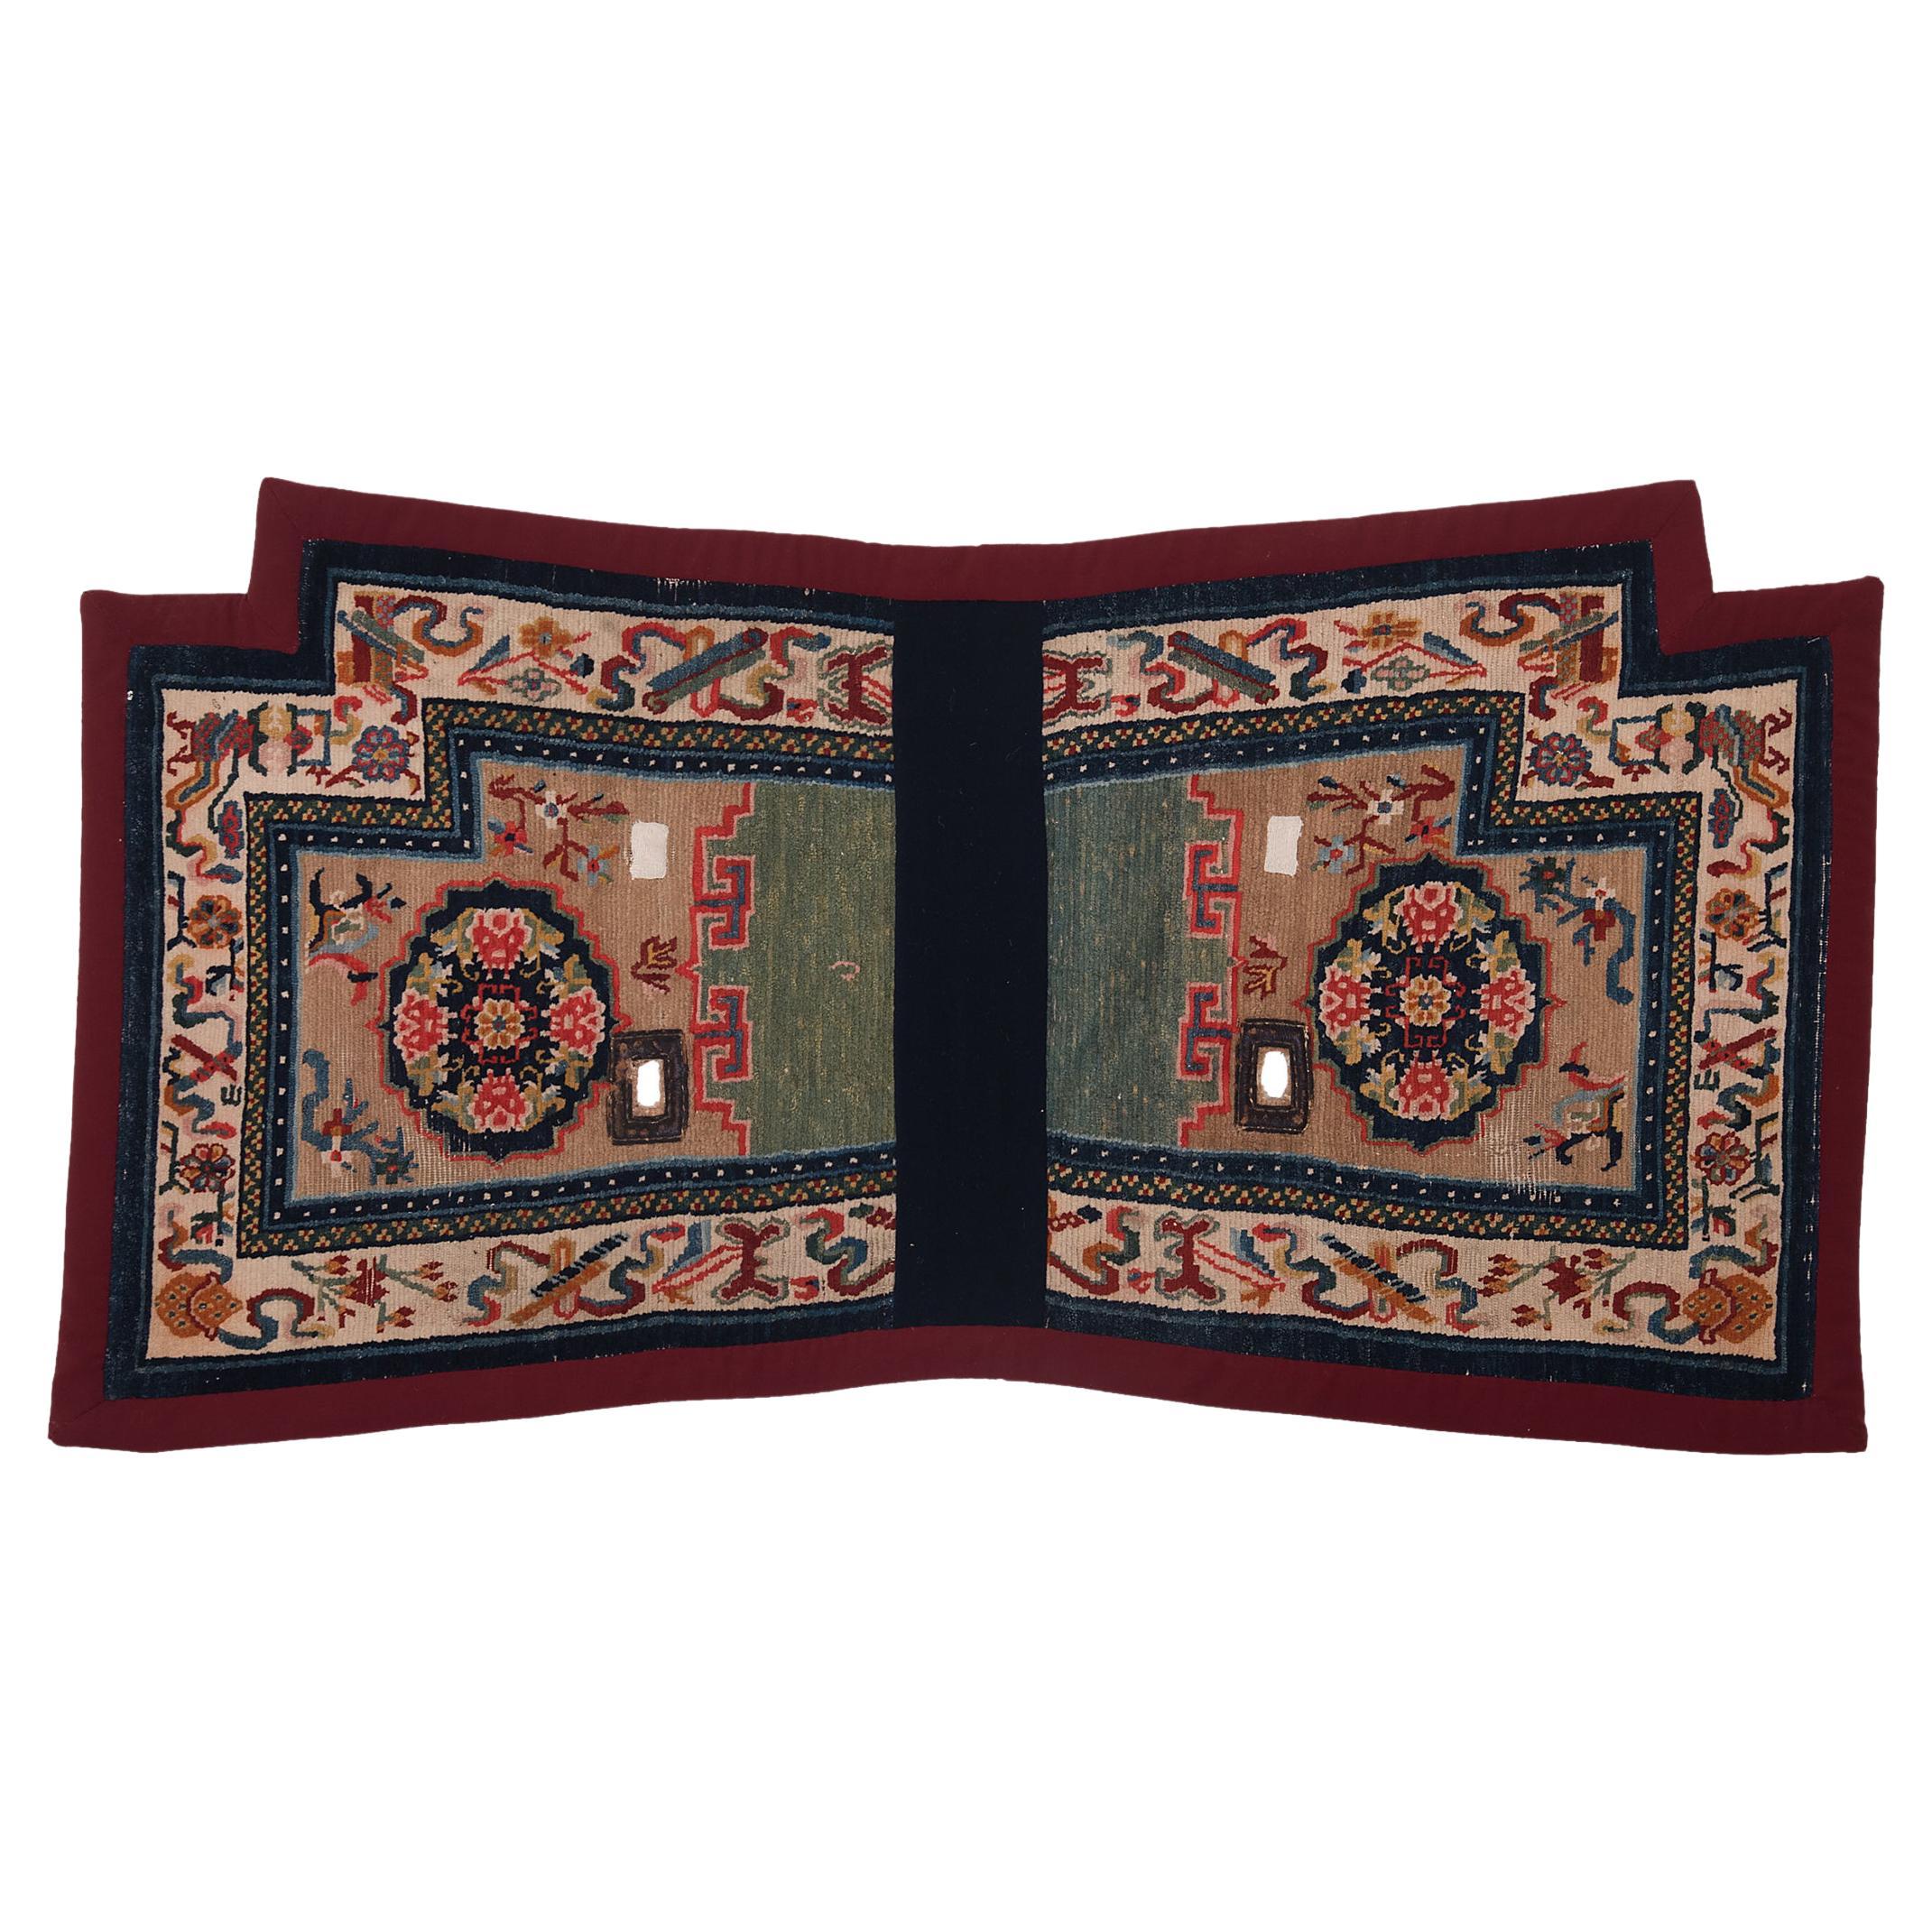 Tibetan Saddle Carpet with Scholars' Objects, c. 1900 For Sale